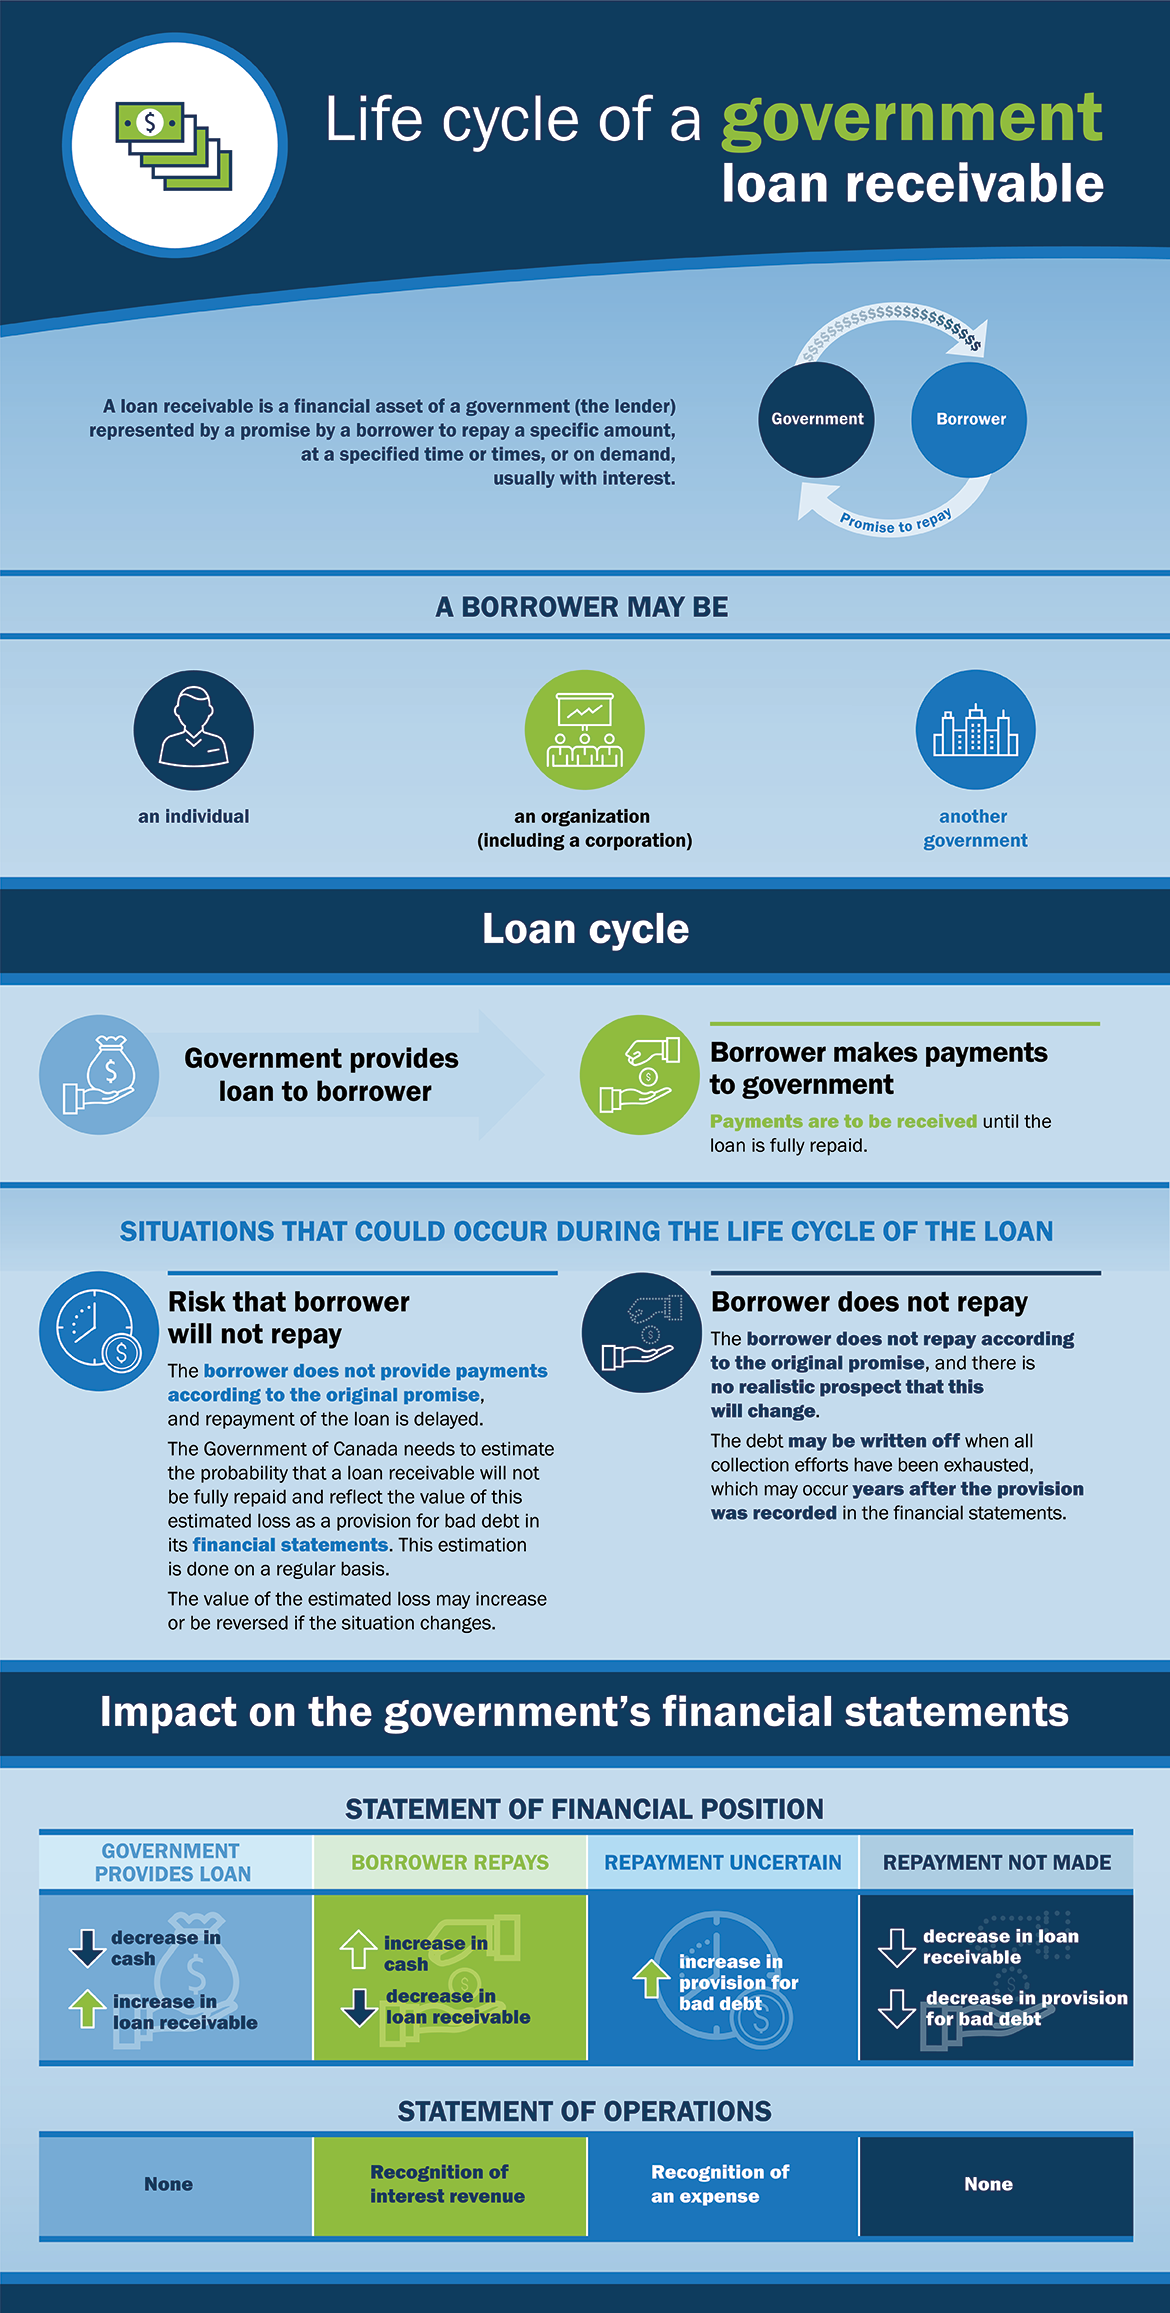 Graphic showing an overview of the life cycle of a loan receivable, including the impact on the financial statements of a government